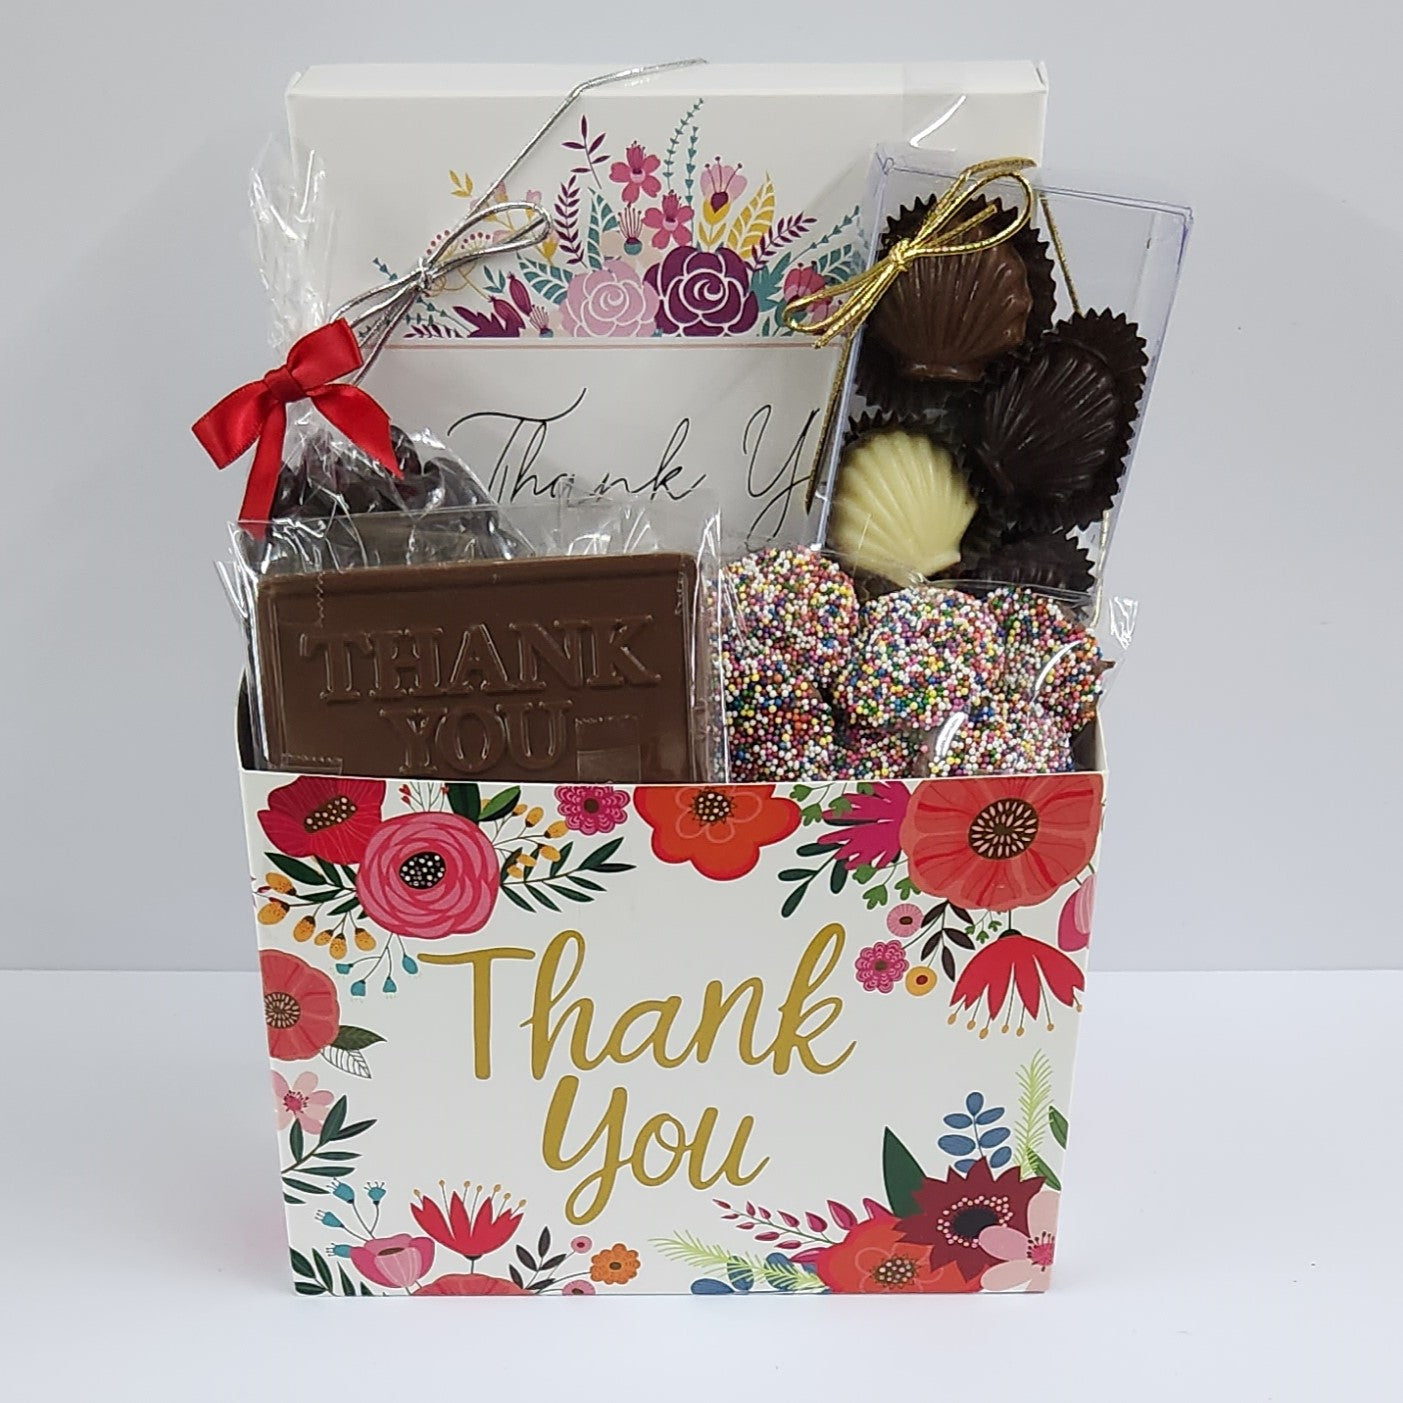 Thank You Floral Gift Basket from Stage Stop Candy features Milk, Dark and White Chocolate Shell Assortment, a Milk Chocolate card that says "Thank You," and Dark Chocolate covered Cranberries, and a 16 piece Thank You Box assortment featuring Creams, Caramels, Meltaways, and Truffles